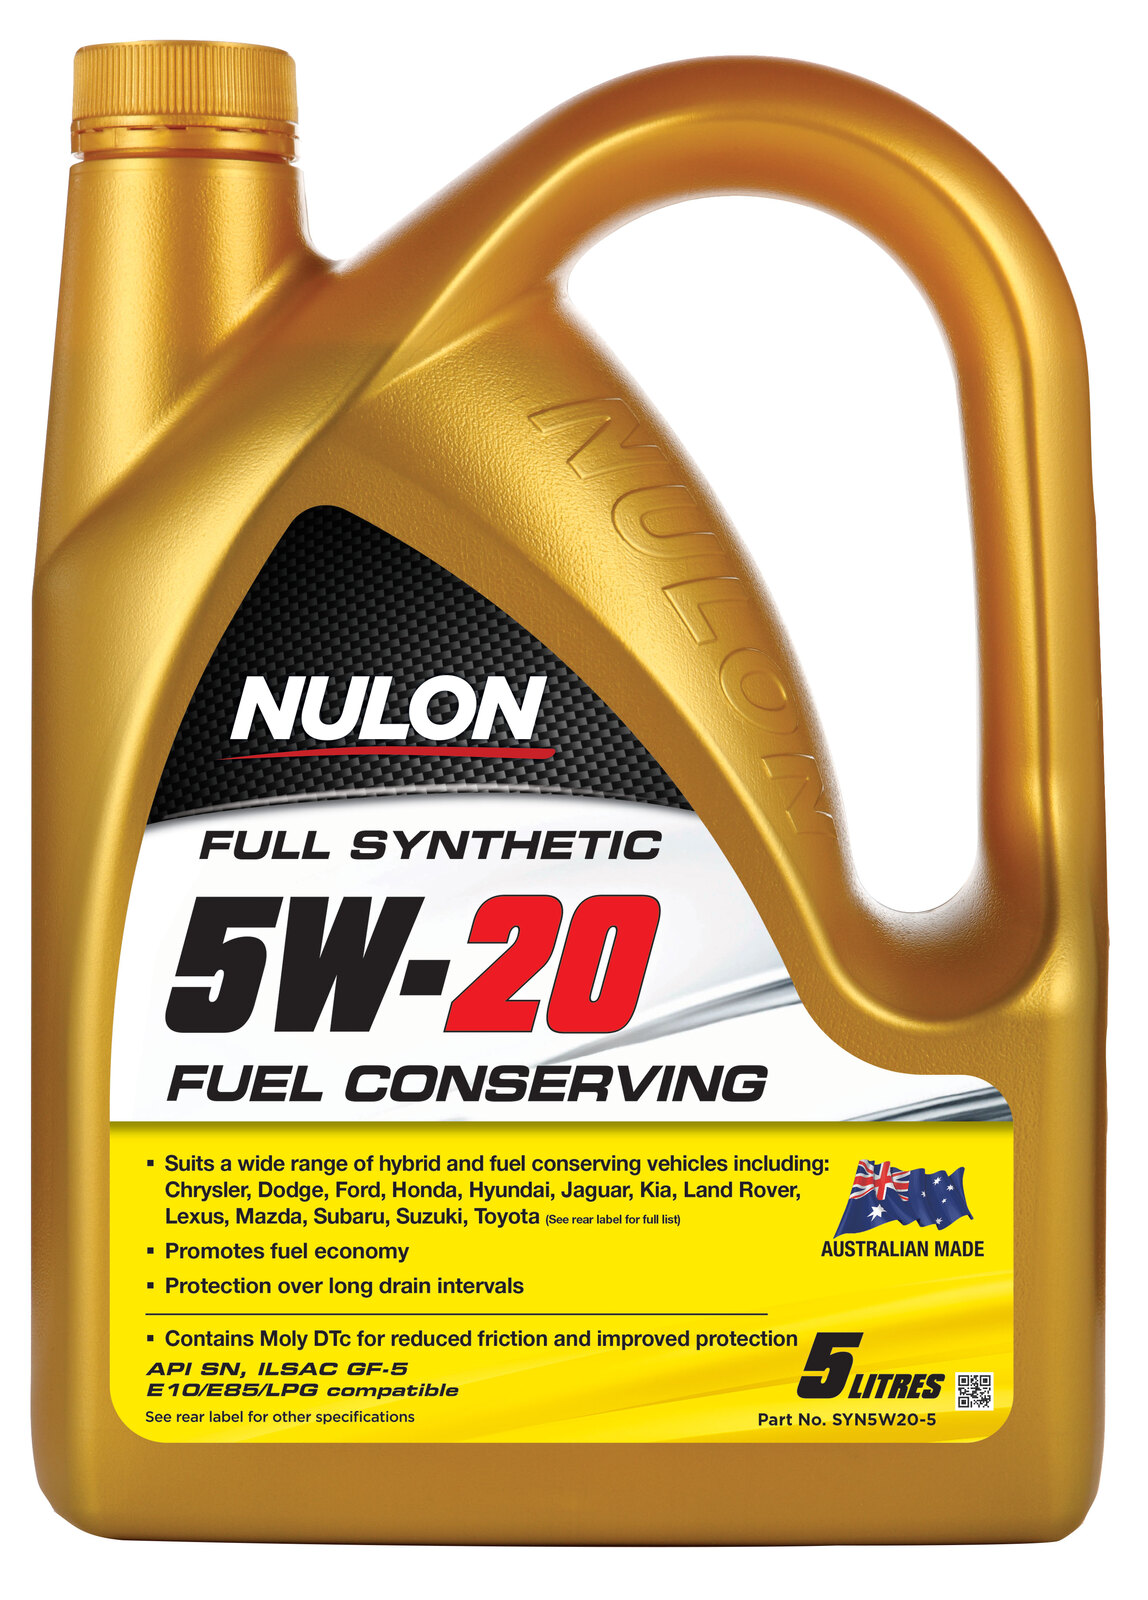 NULON Full Synthetic High Strength 5W20 Engine Oil 5L, Each